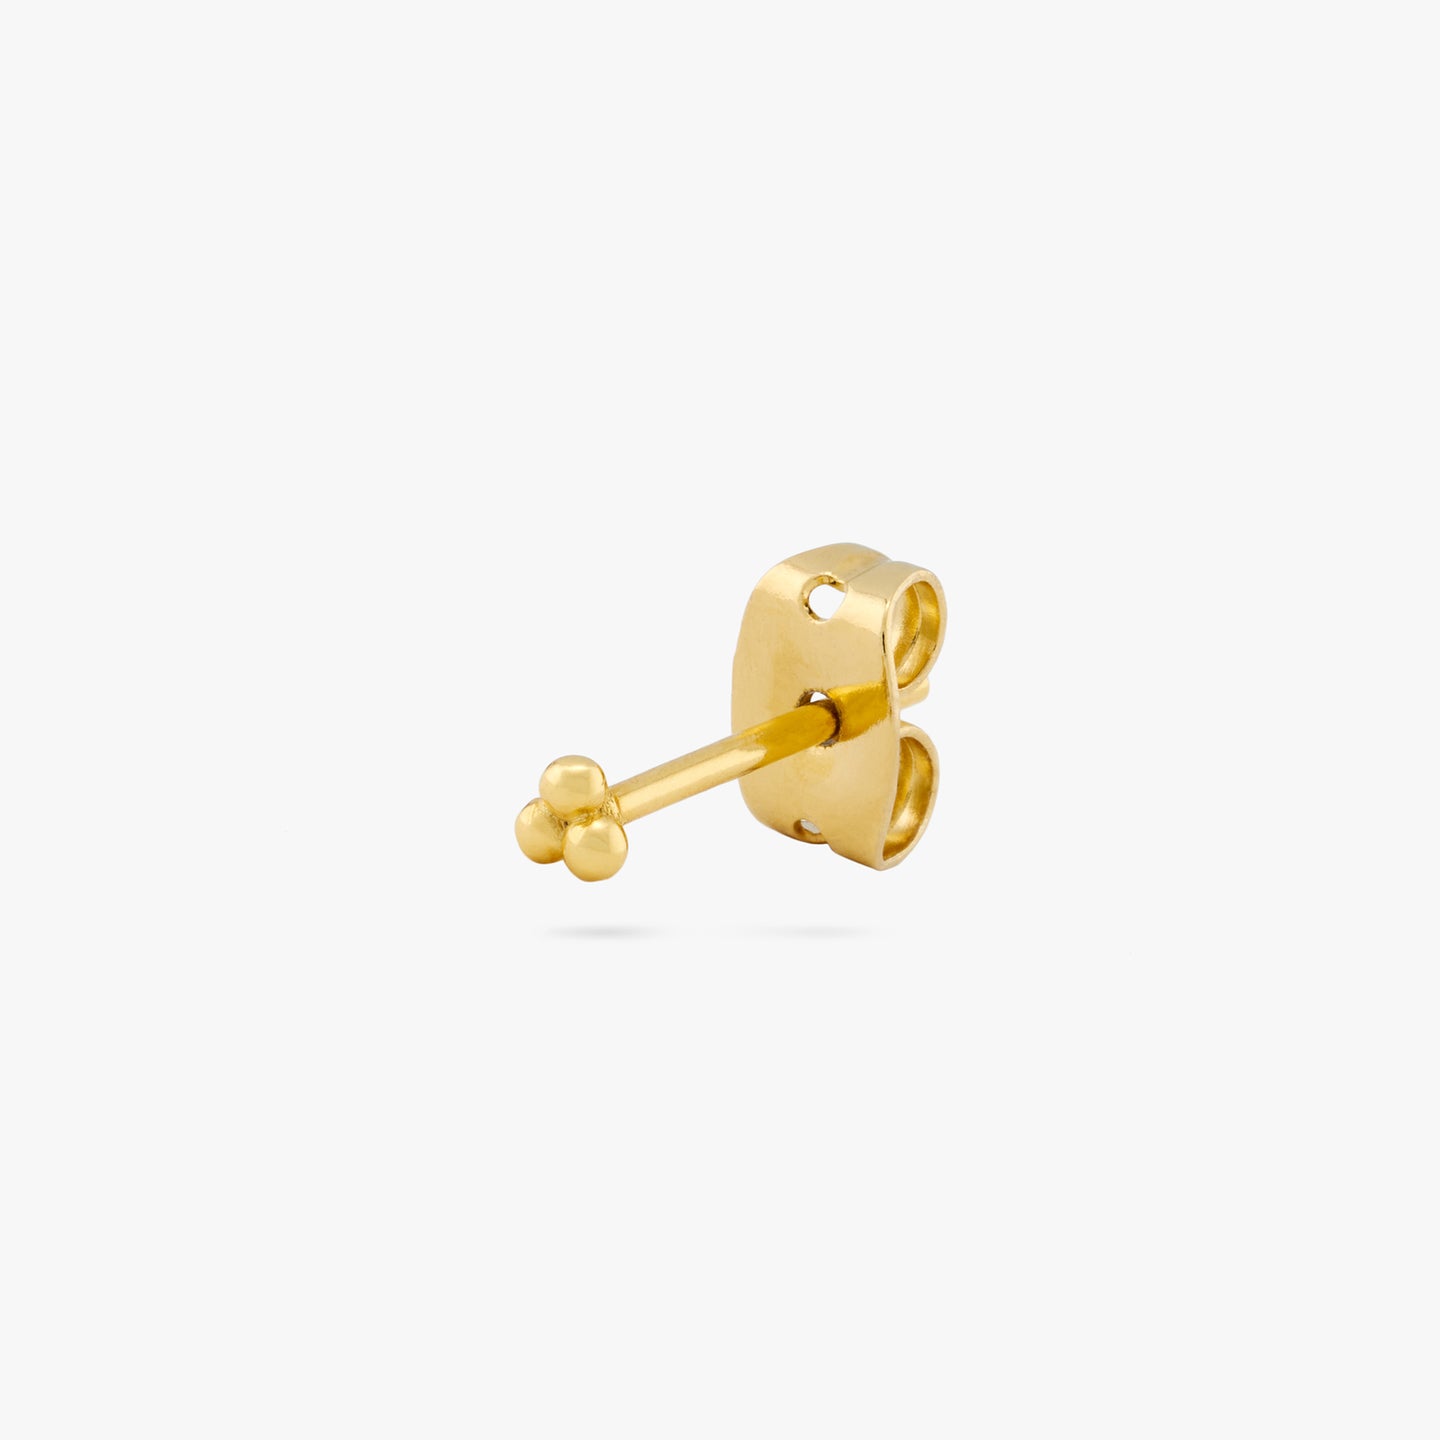 Three gold beads stacked in a triangle formation on a stud post color:null|gold